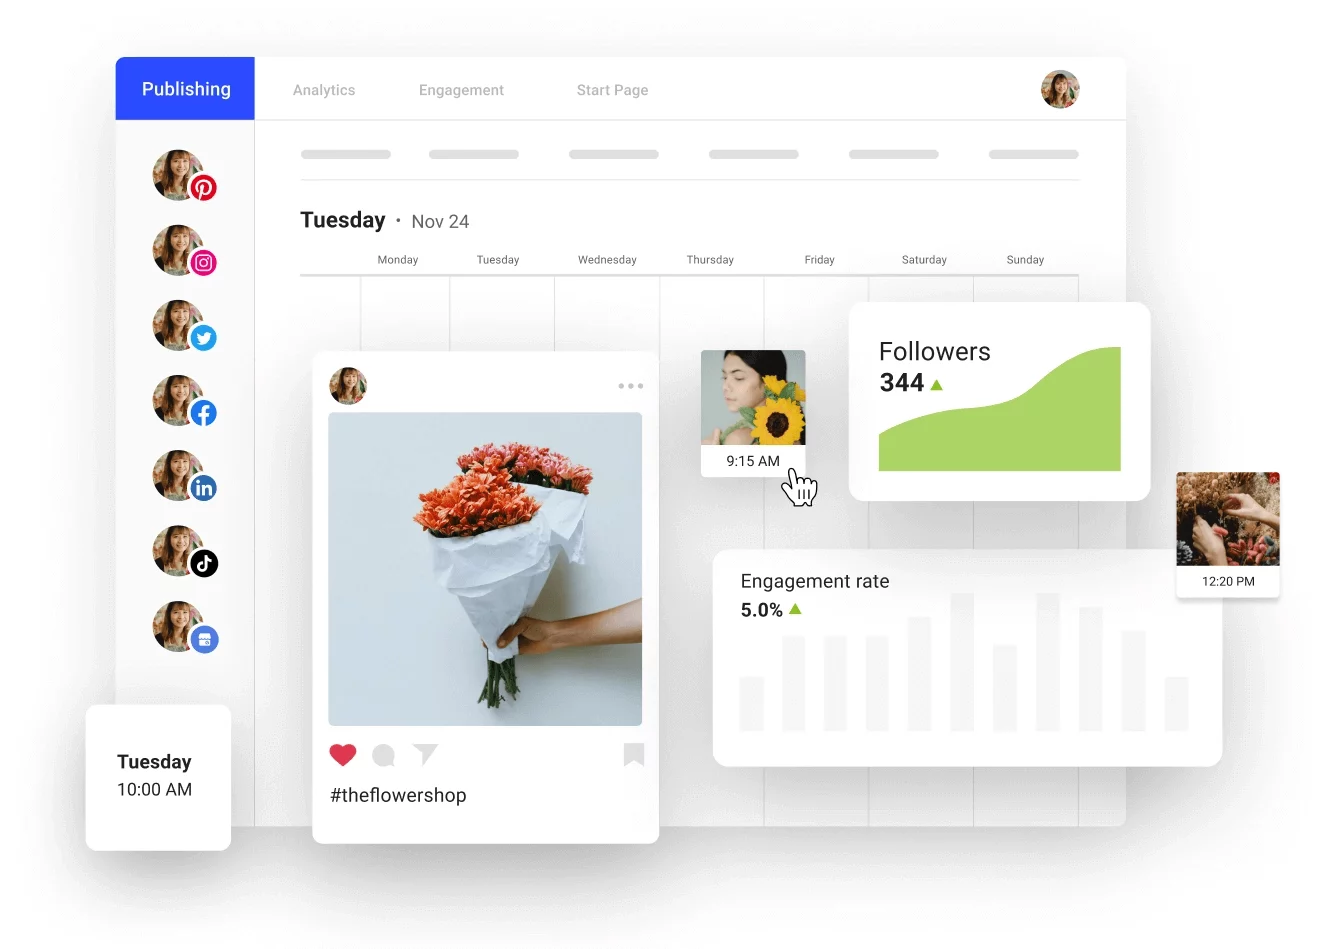 Social media dashboard in Buffer showing scheduled posts, follower growth, and engagement rate. Highlighted post features a bouquet of flowers.